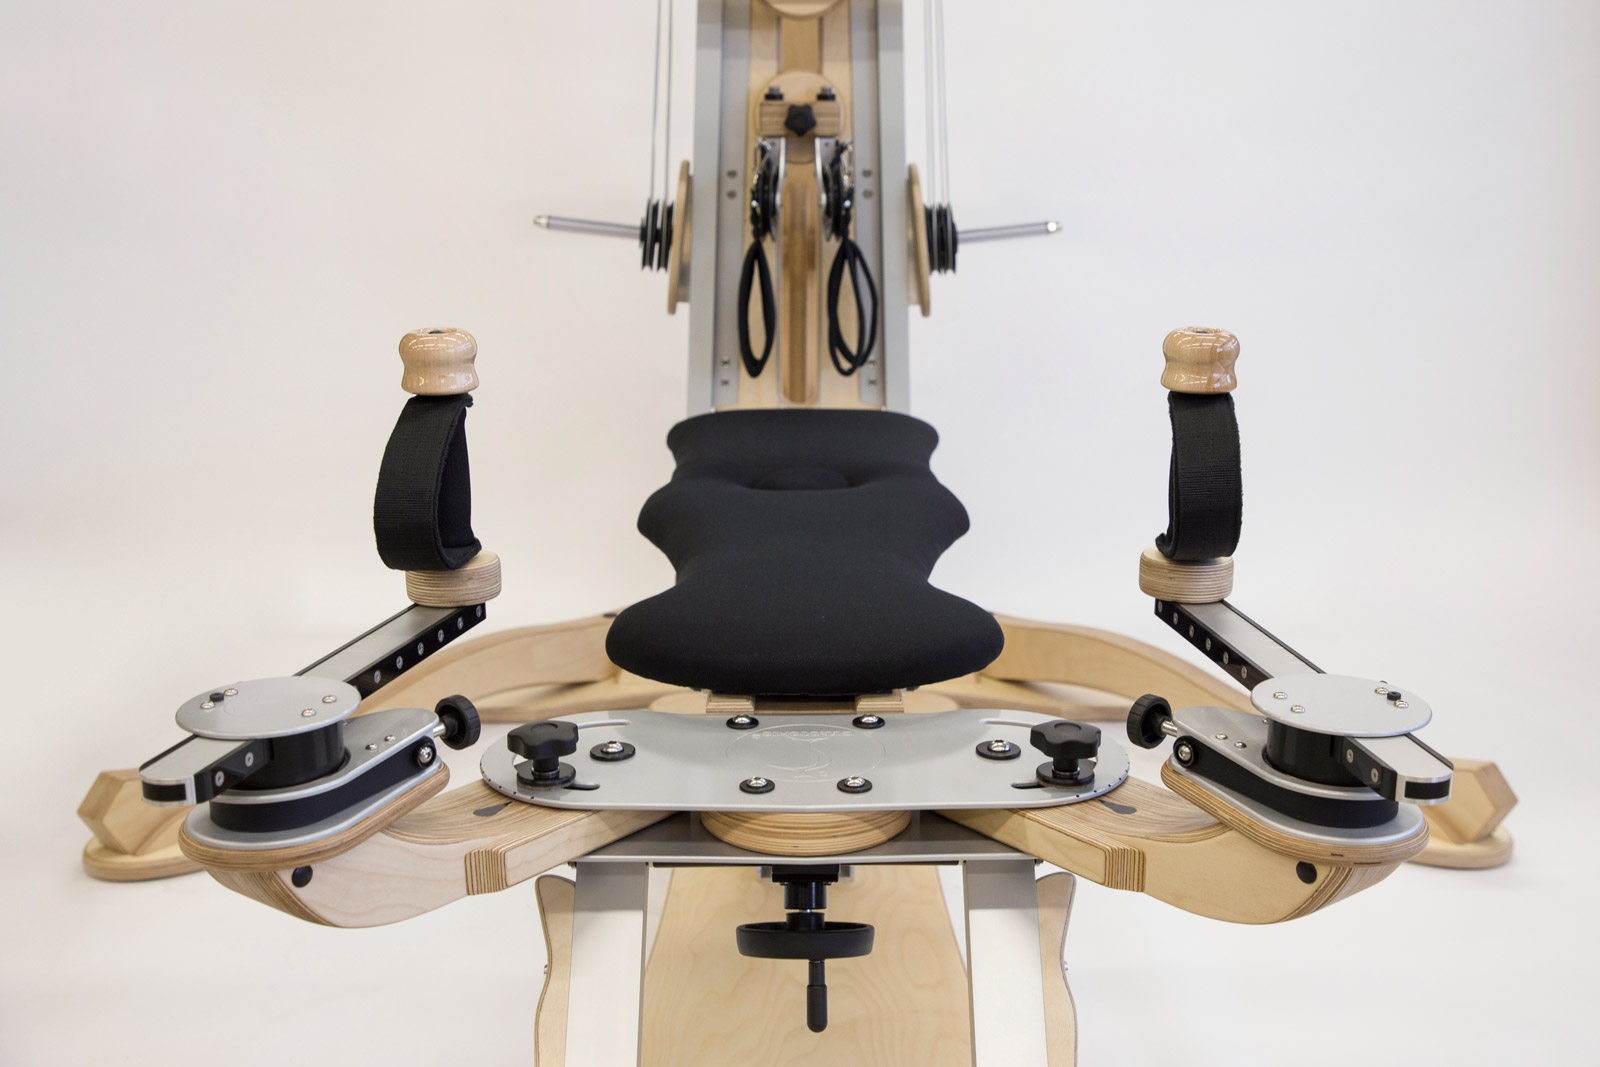 GYROTONIC® Europe – Official distributor of GYROTONIC® Equipment in Europe